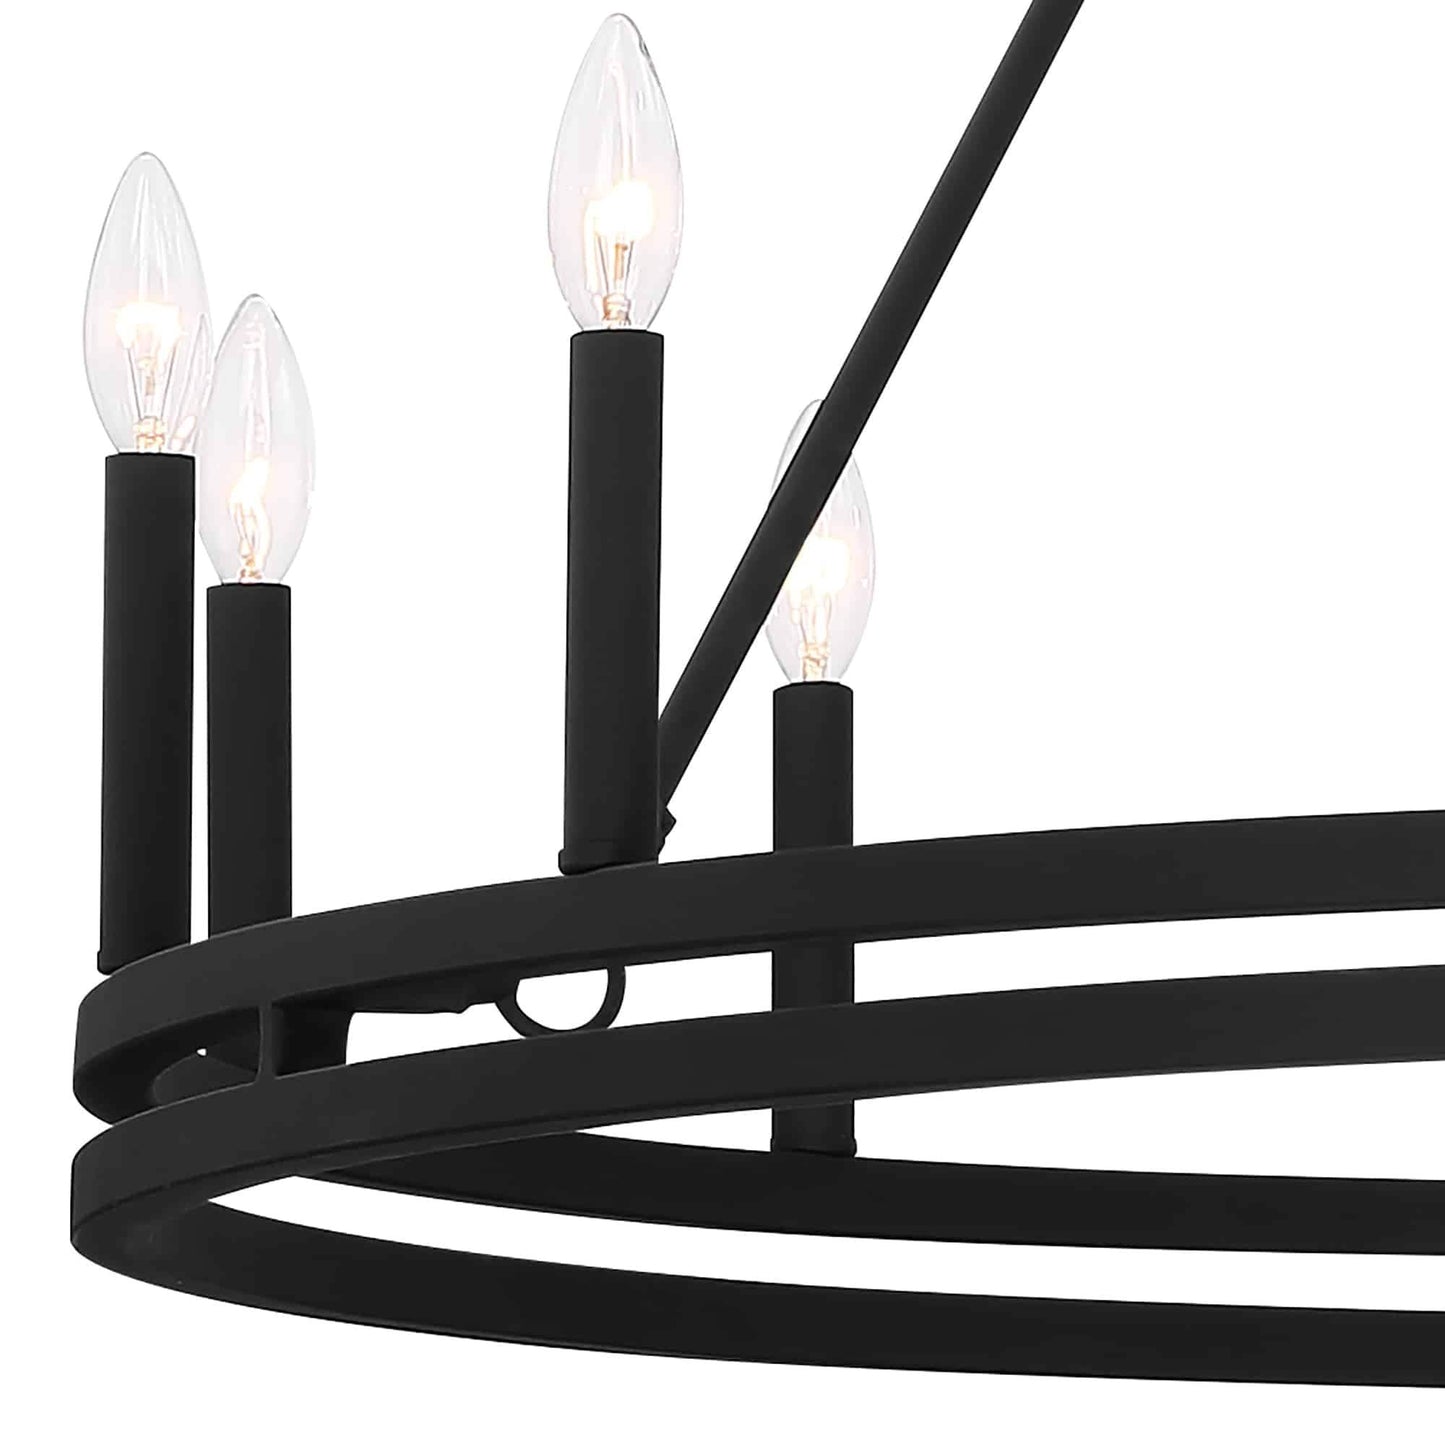 20 light candle style wagon wheel tiered chandelier (7) by ACROMA